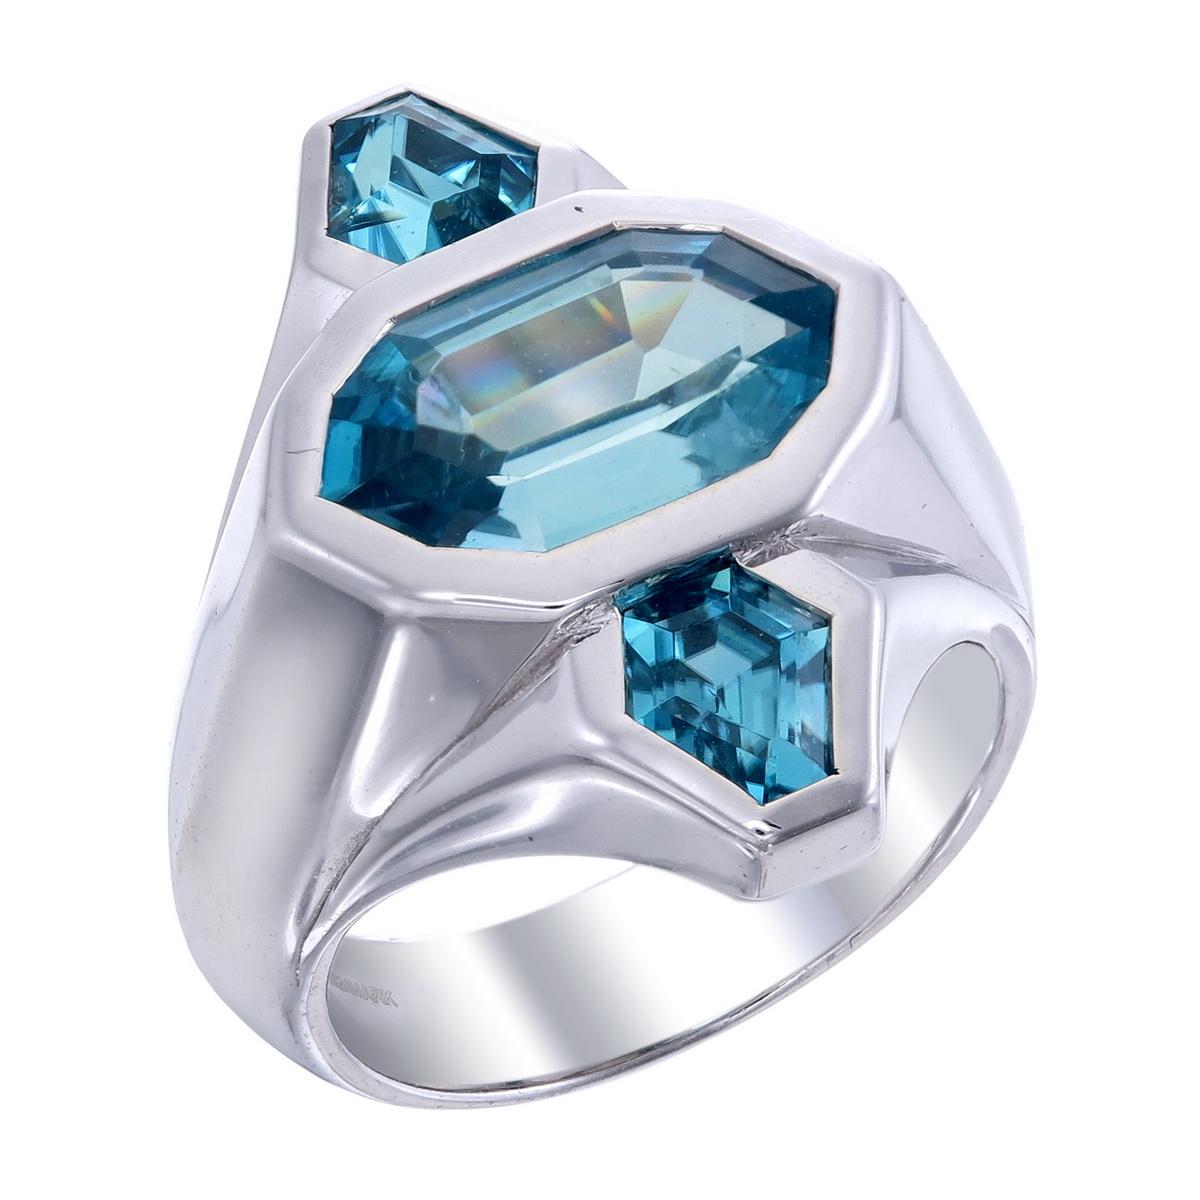 Orloff of Denmark; Natural Blue Zircon Three-Stone ring set in 925 Sterling Silver.

Featured on this peace are three metallic blue zircons mined in Ratanakiri, Cambodia and later re-cut in Bangkok, Thailand.
Presented in an exclusive North-to-South